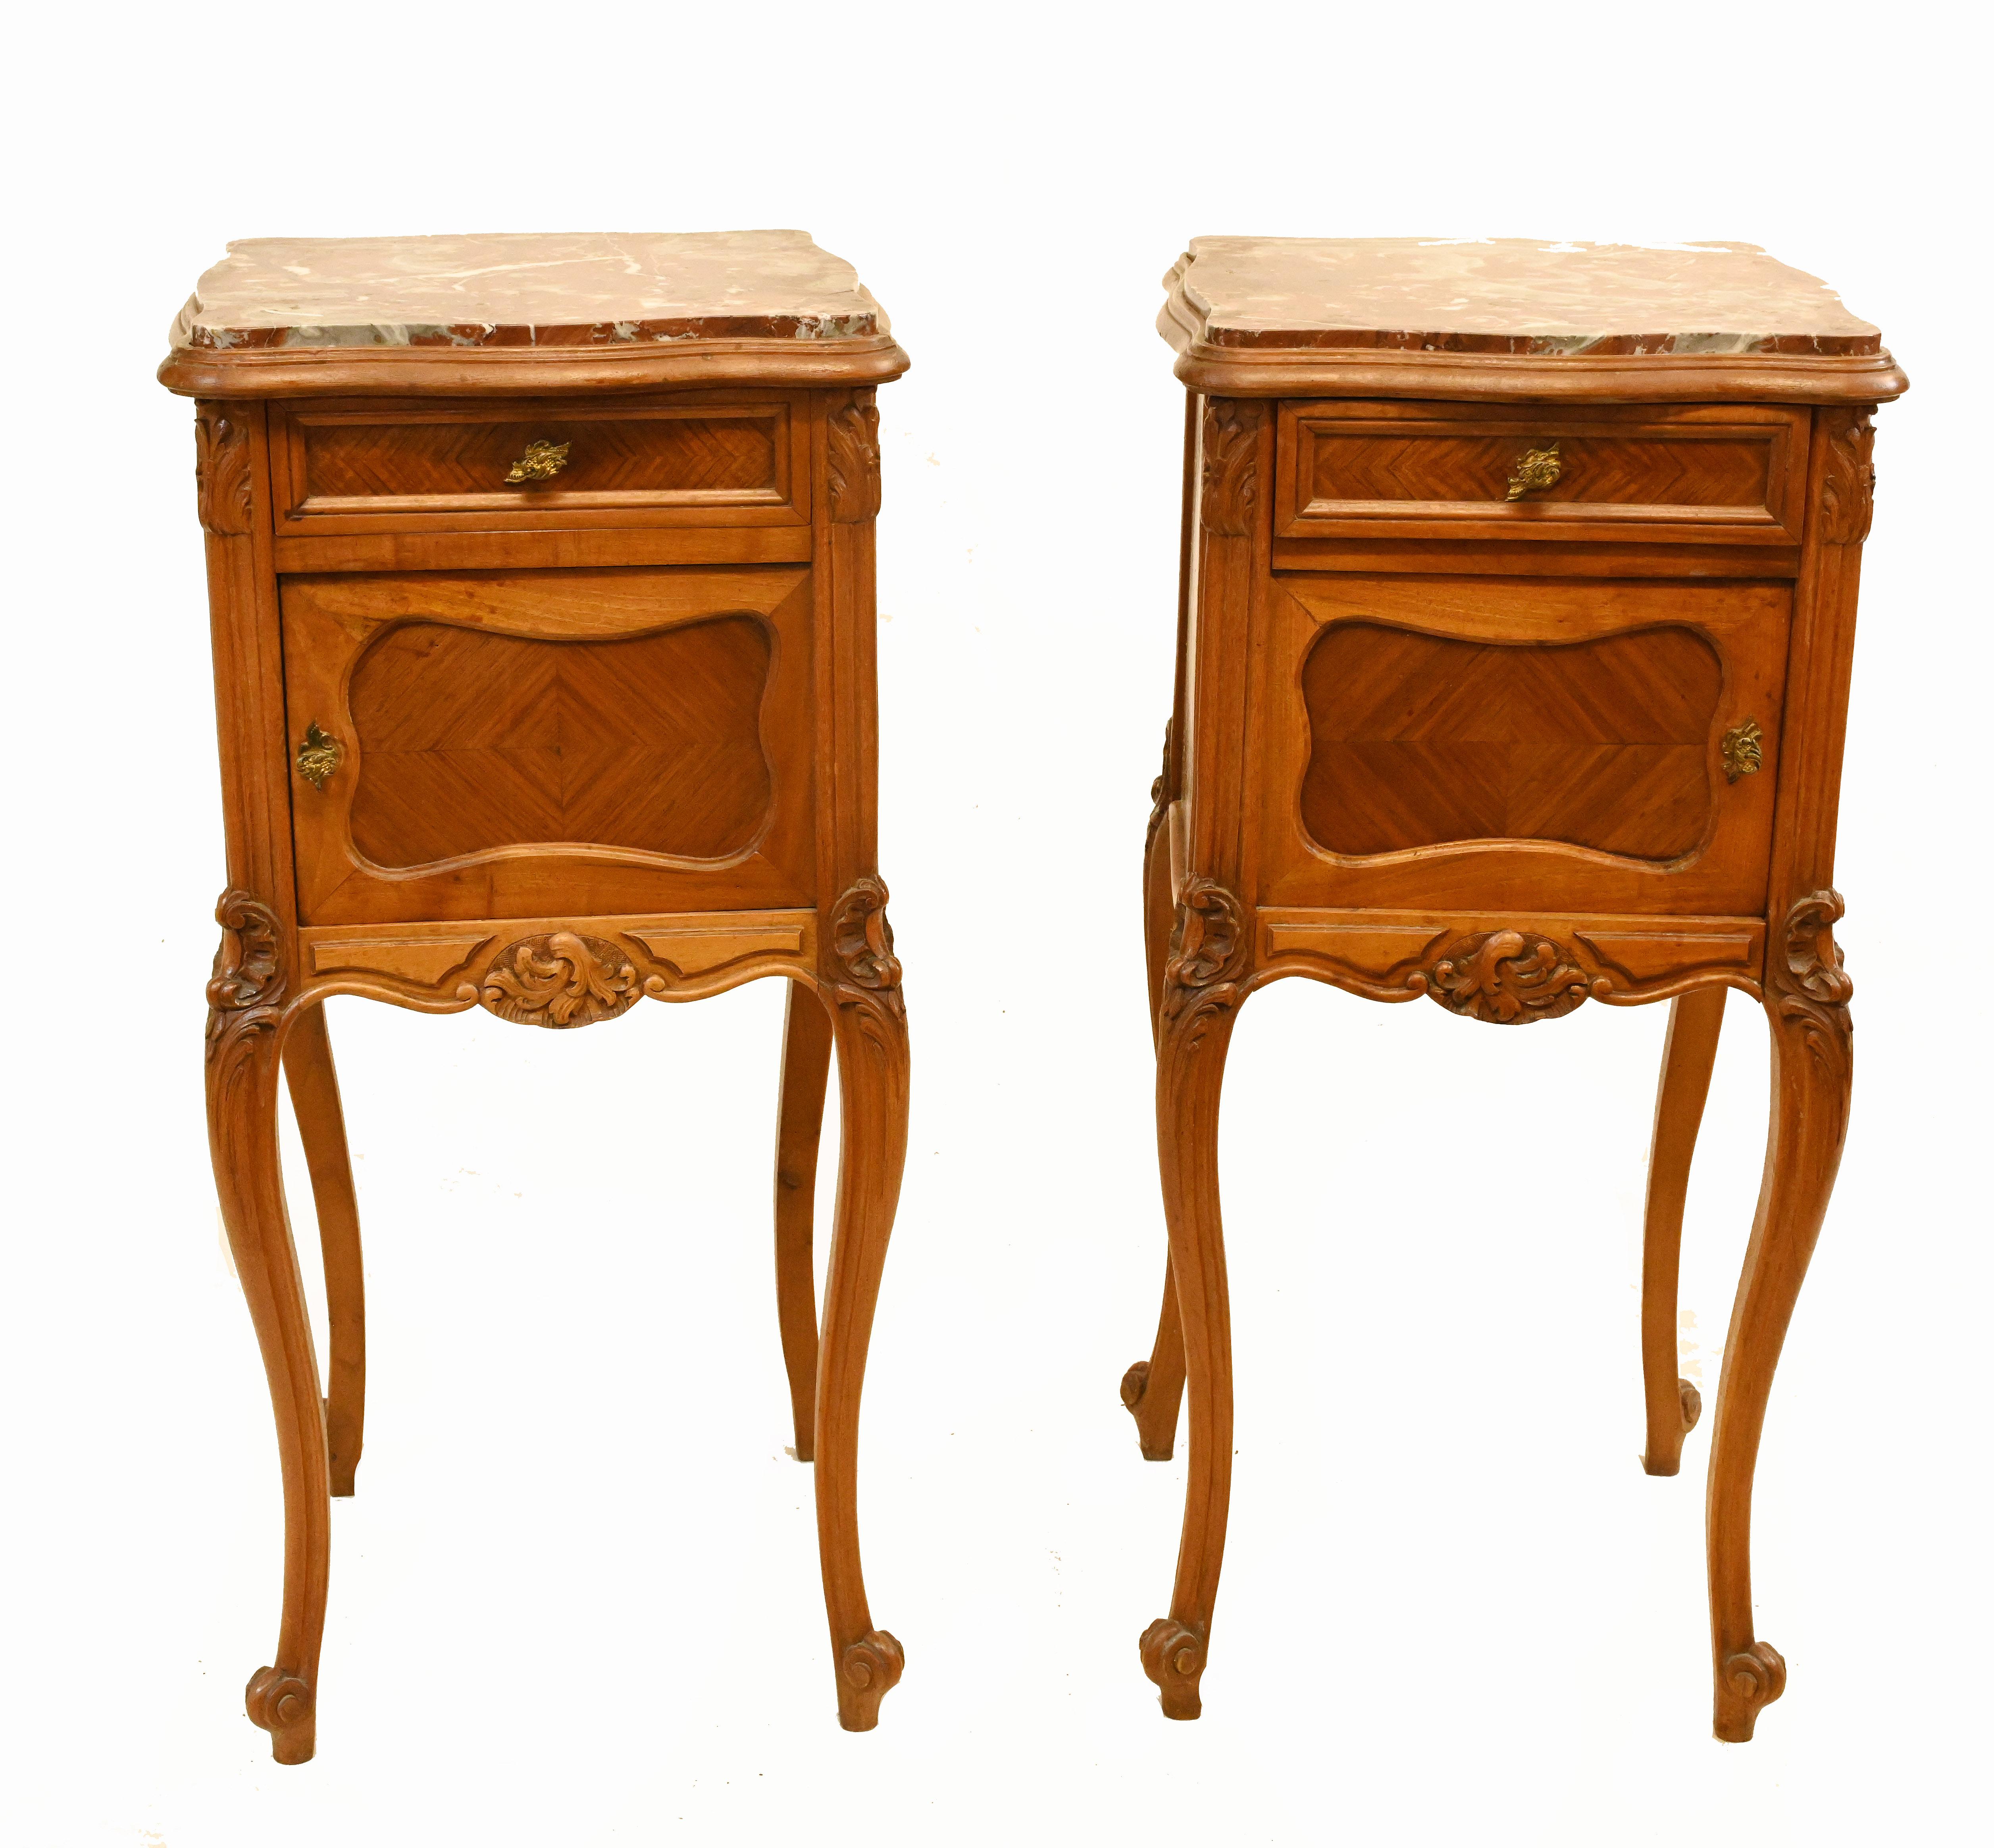 Cute pair of antique French bedside chests 
We date to circa 1900 and they are in walnut with marble tops
Great find on the Marche Biron at the Paris antiques markets
Viewing by appointment
Offered in great shape ready for home use right